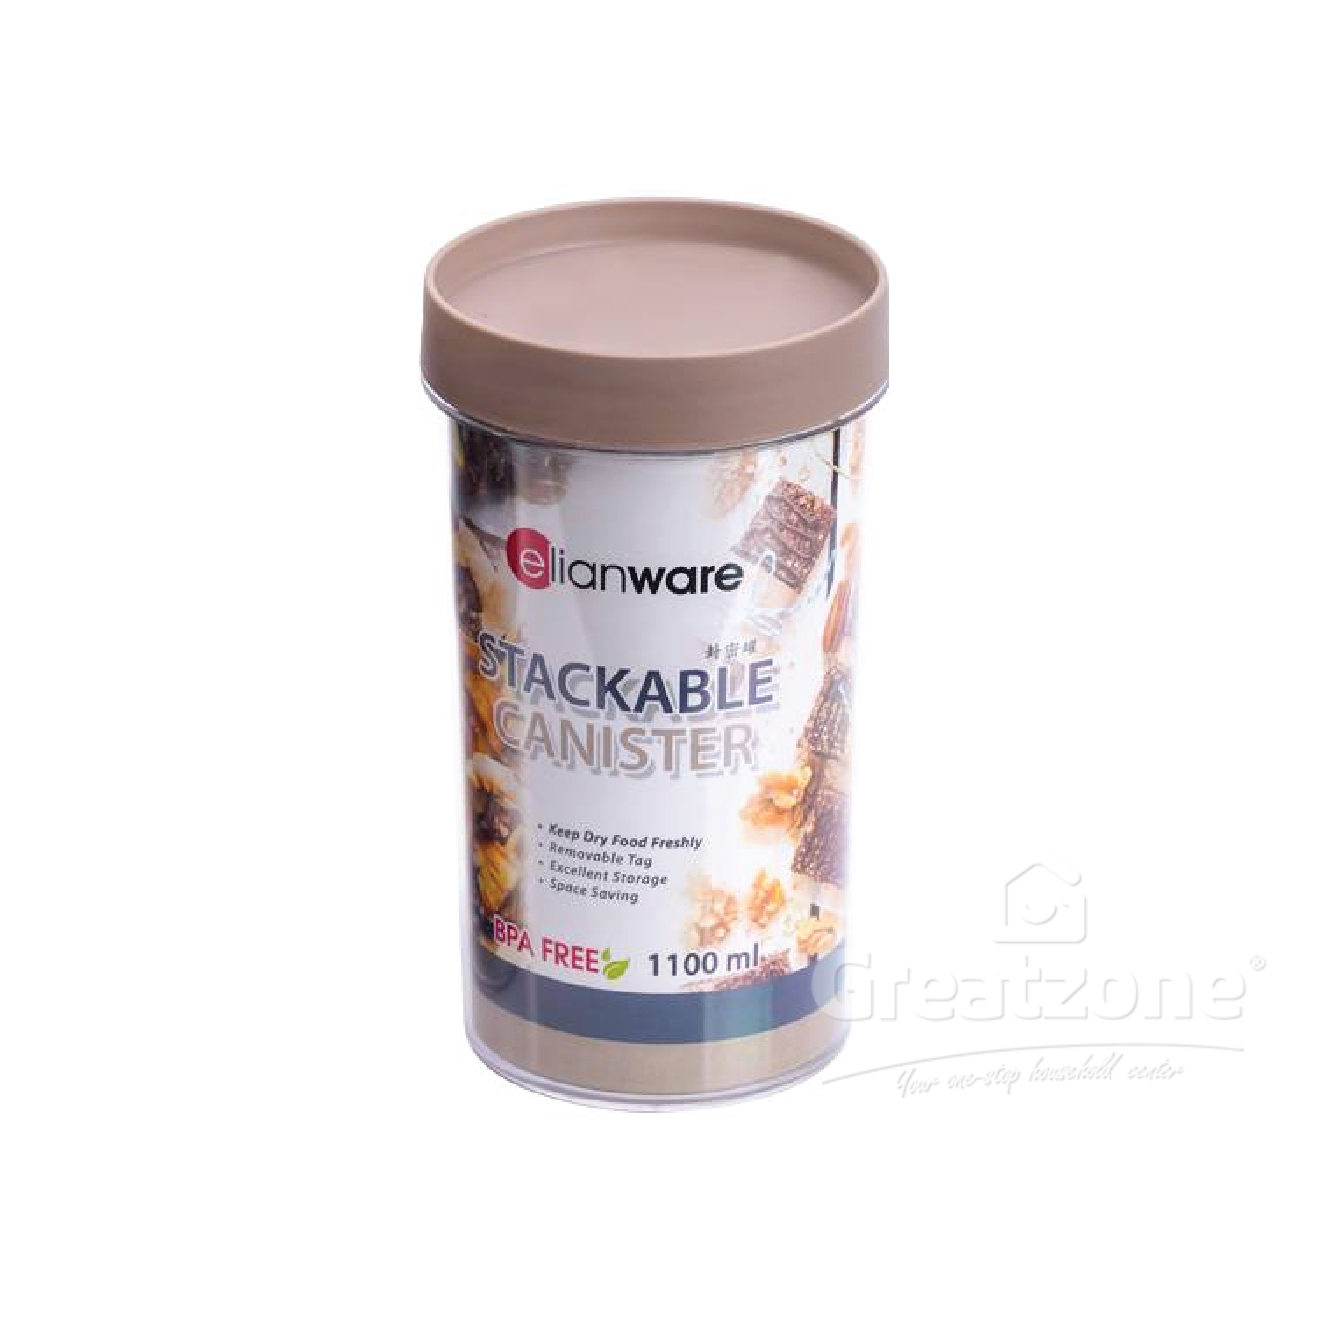 ELIANWARE STACKABLE CANISTER 1100ML E-1105